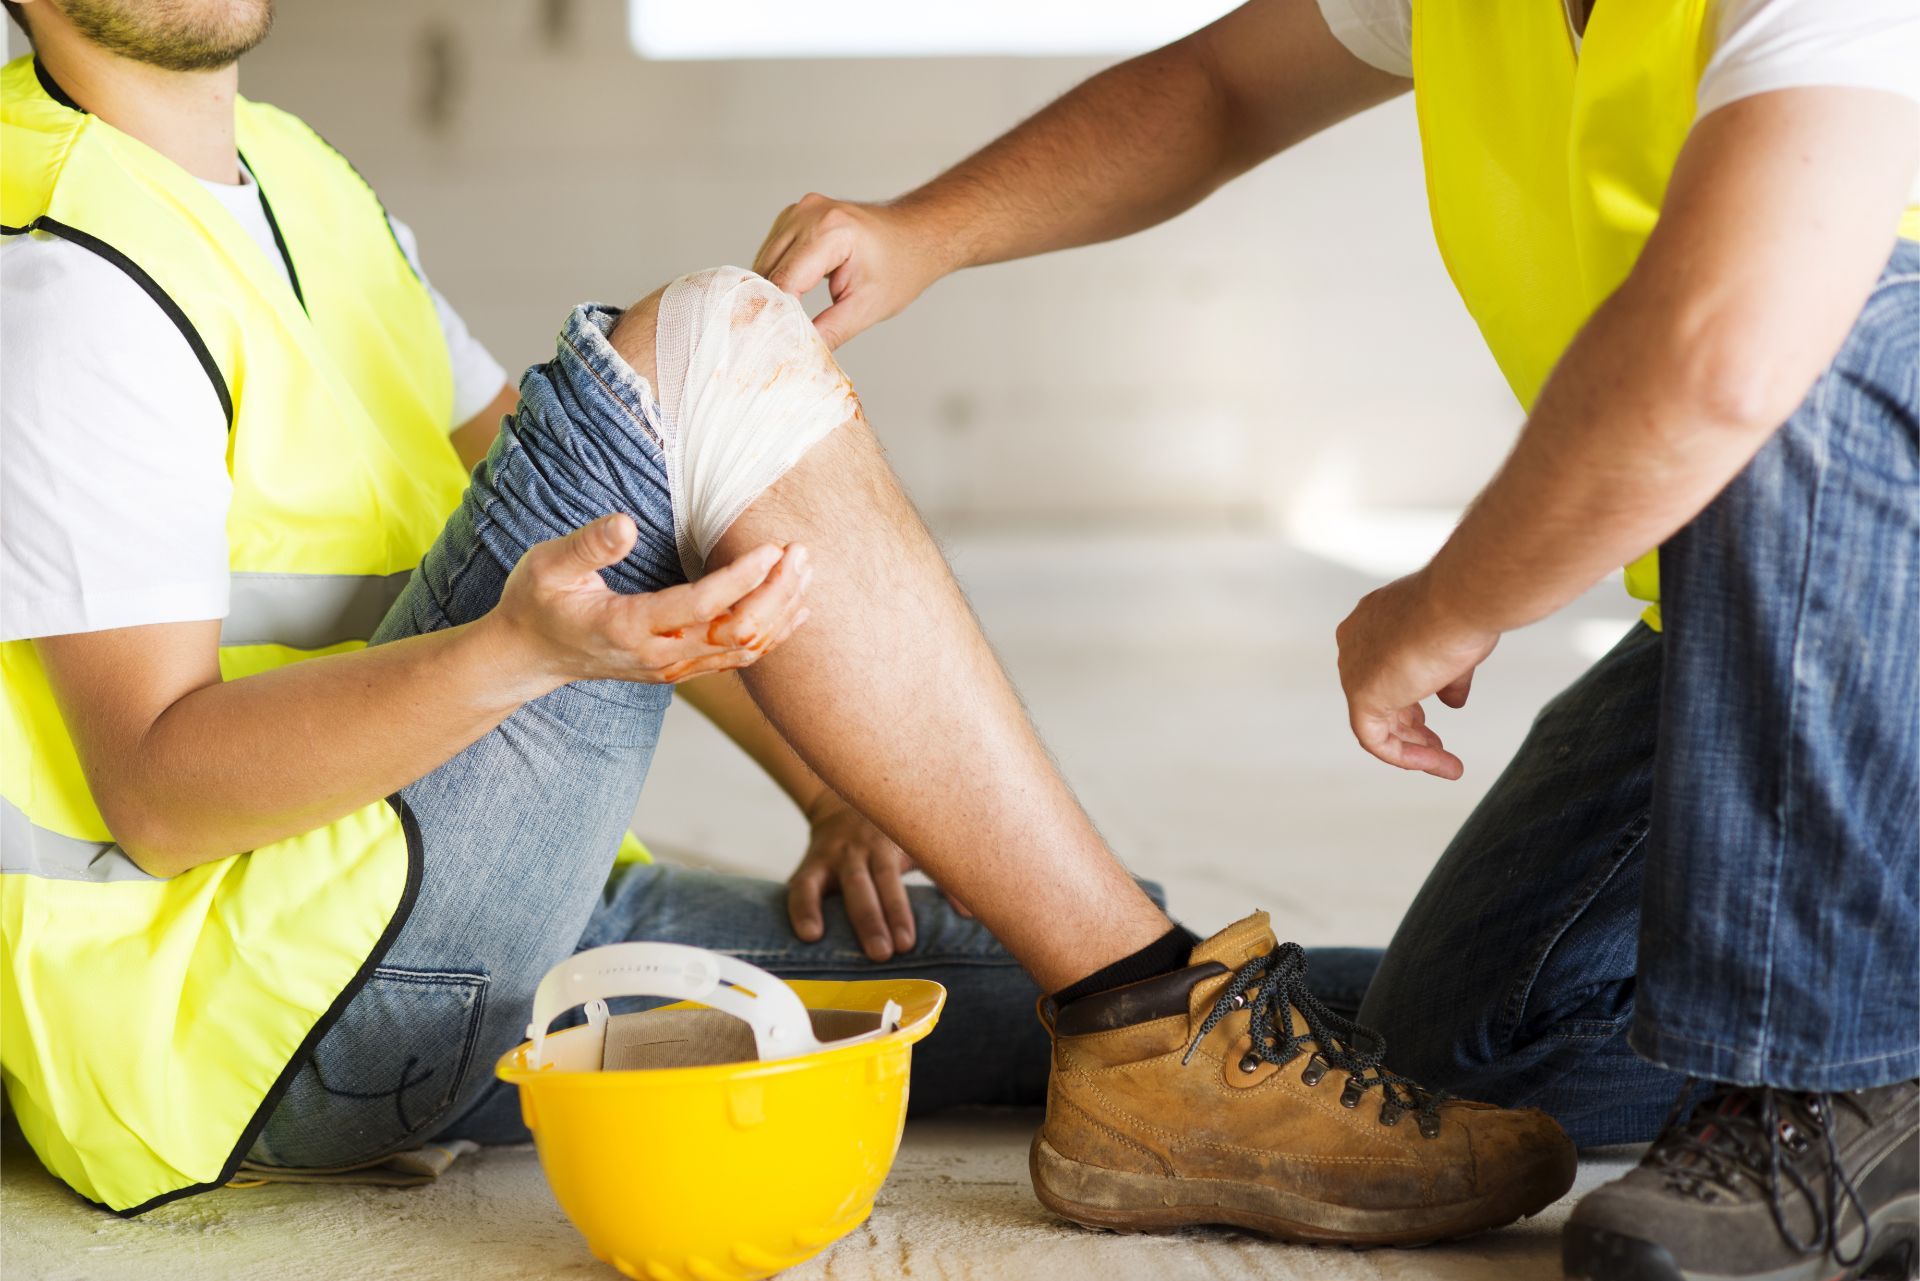 Worker’s compensation solutions